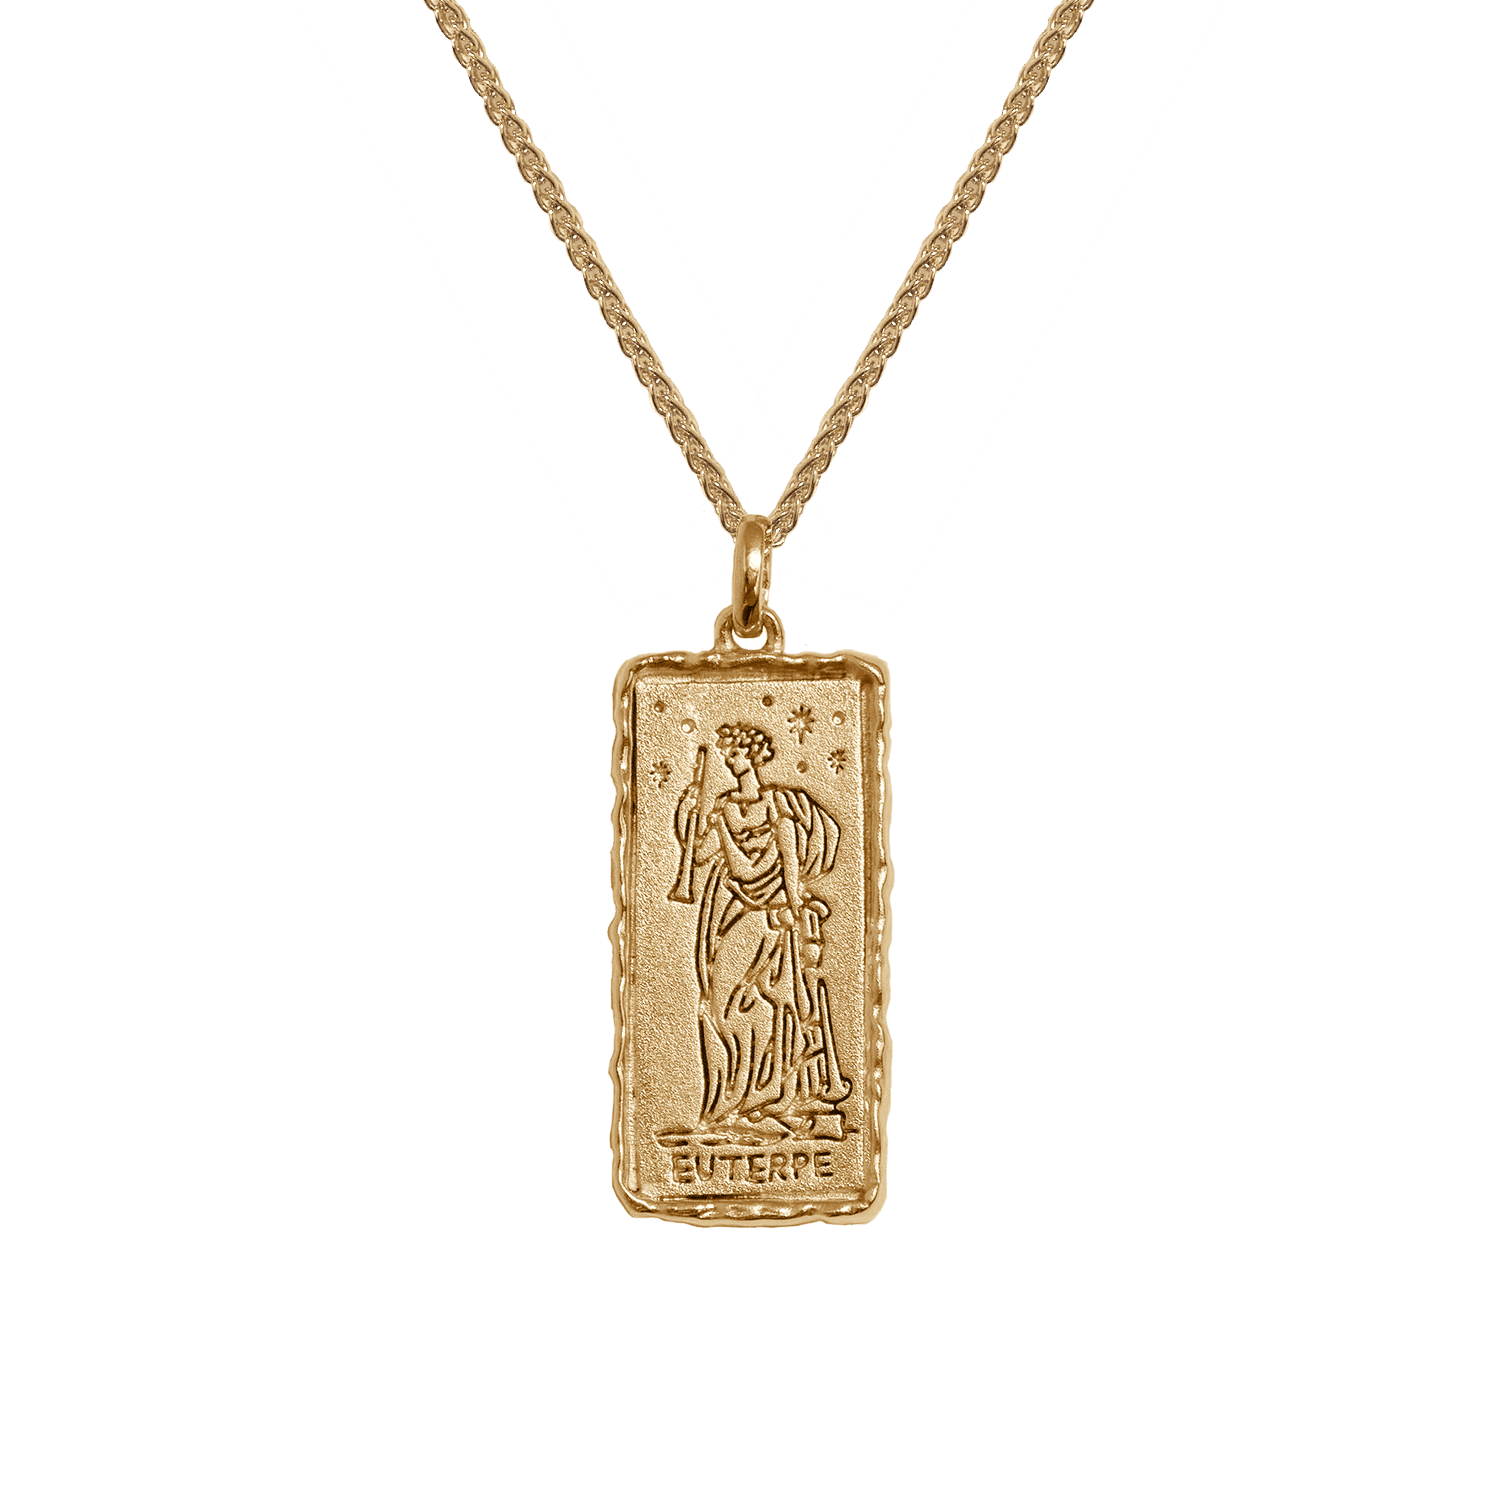 Euterpe Muse of Song Necklace by Common Era